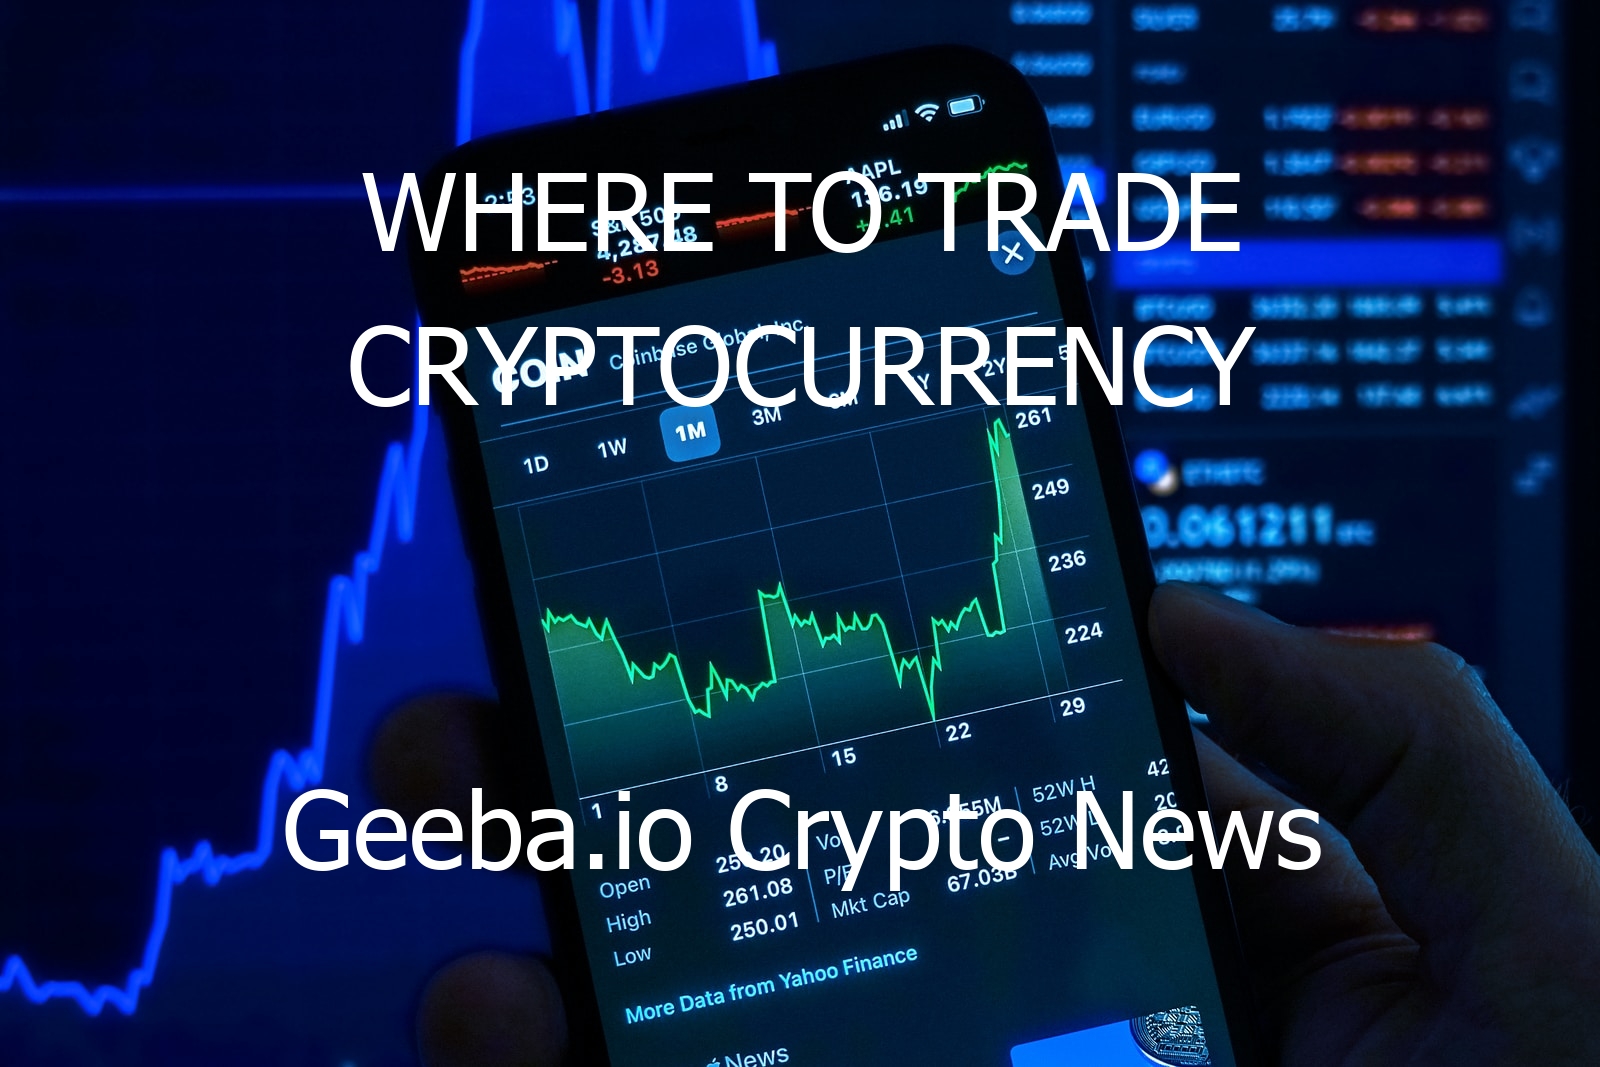 where to trade cryptocurrency 7169